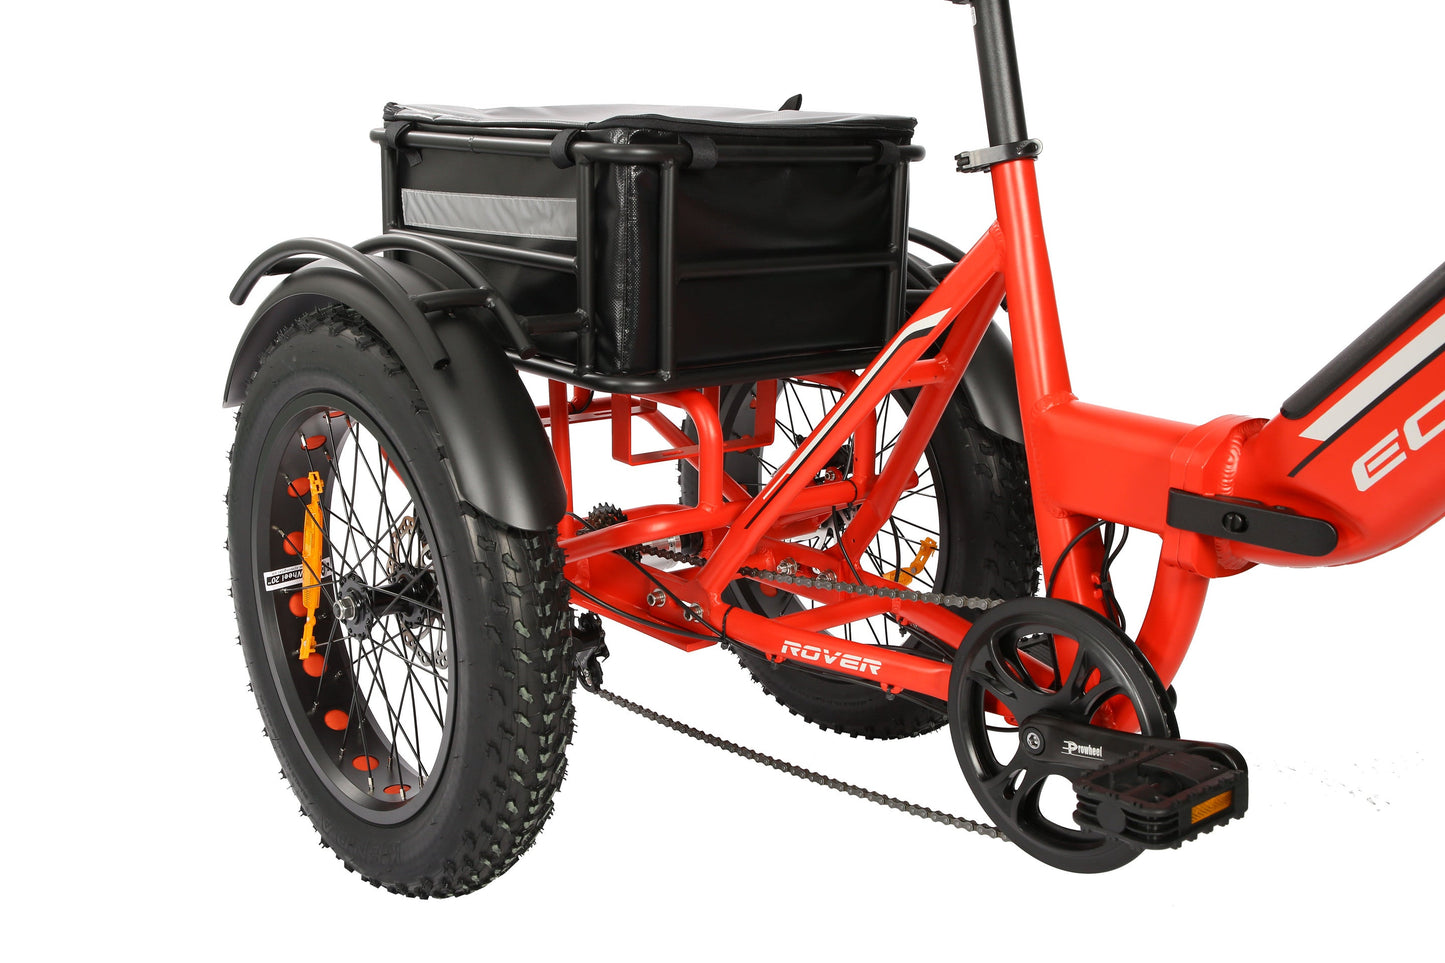 ROVER Pro Electric Tricycle